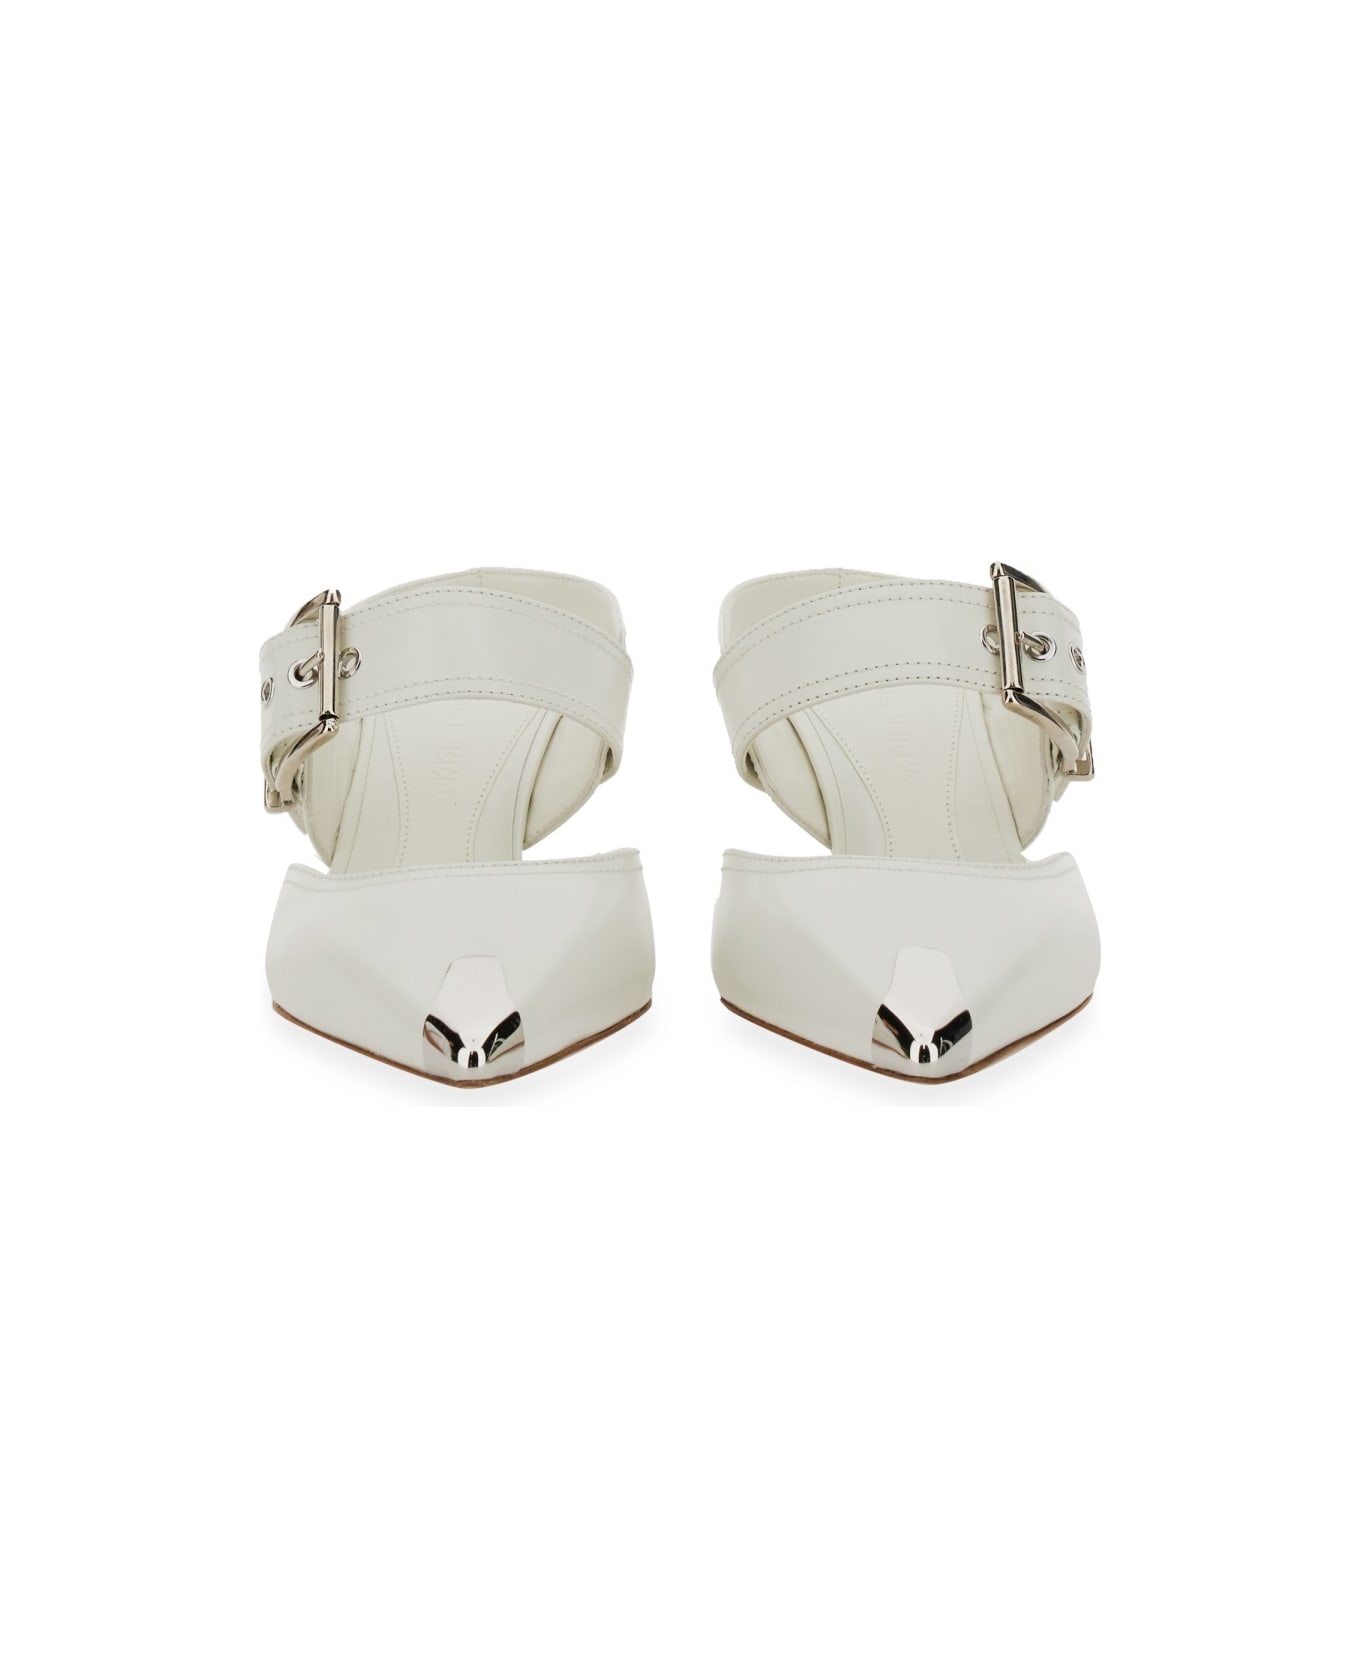 Alexander McQueen Punk Sandal With Buckle - WHITE サンダル